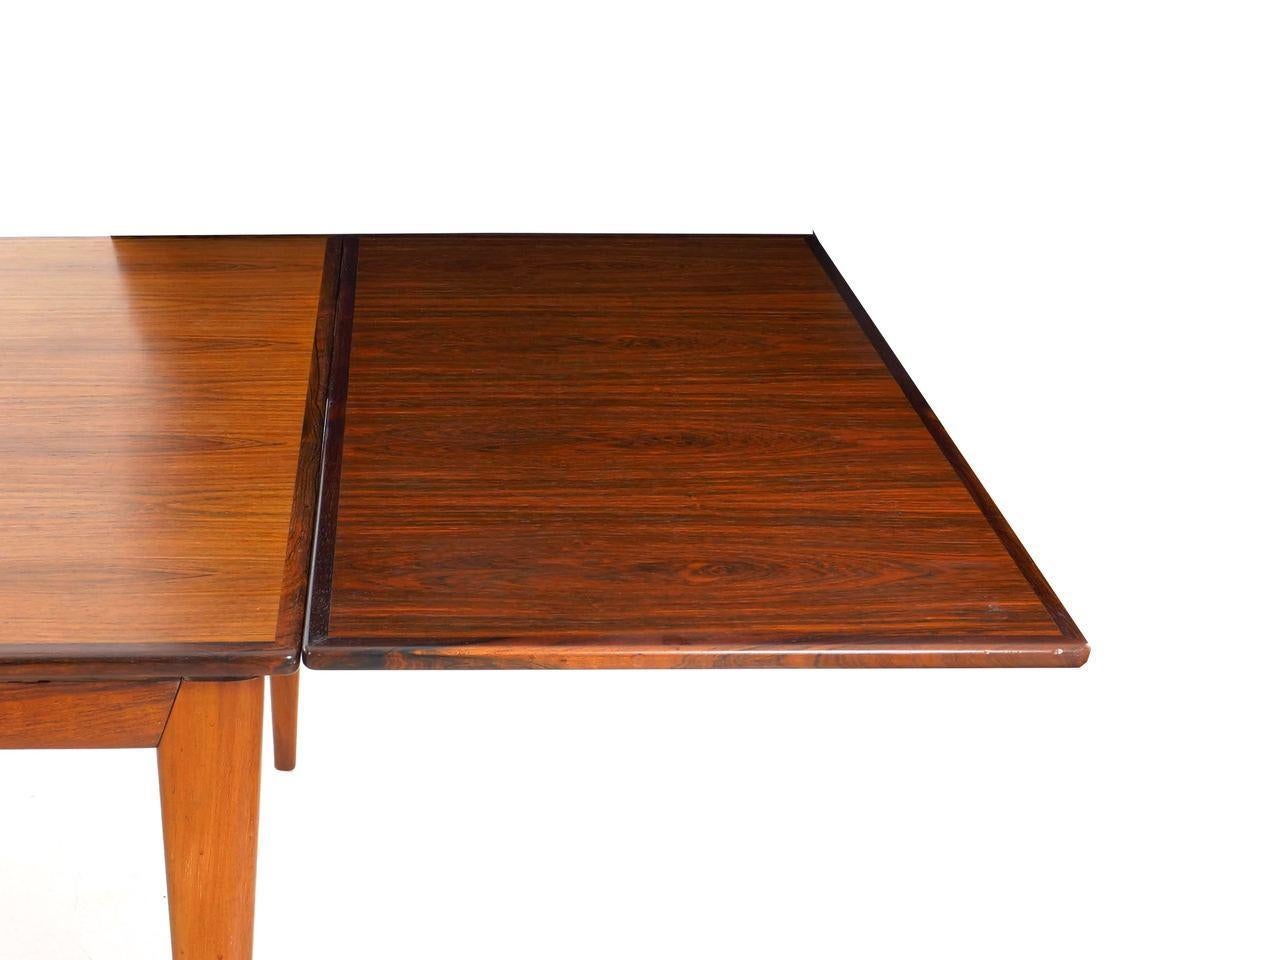 Danish Mid-Century Modern Rosewood Dining Table by Niels Møller, Model No. 254 10